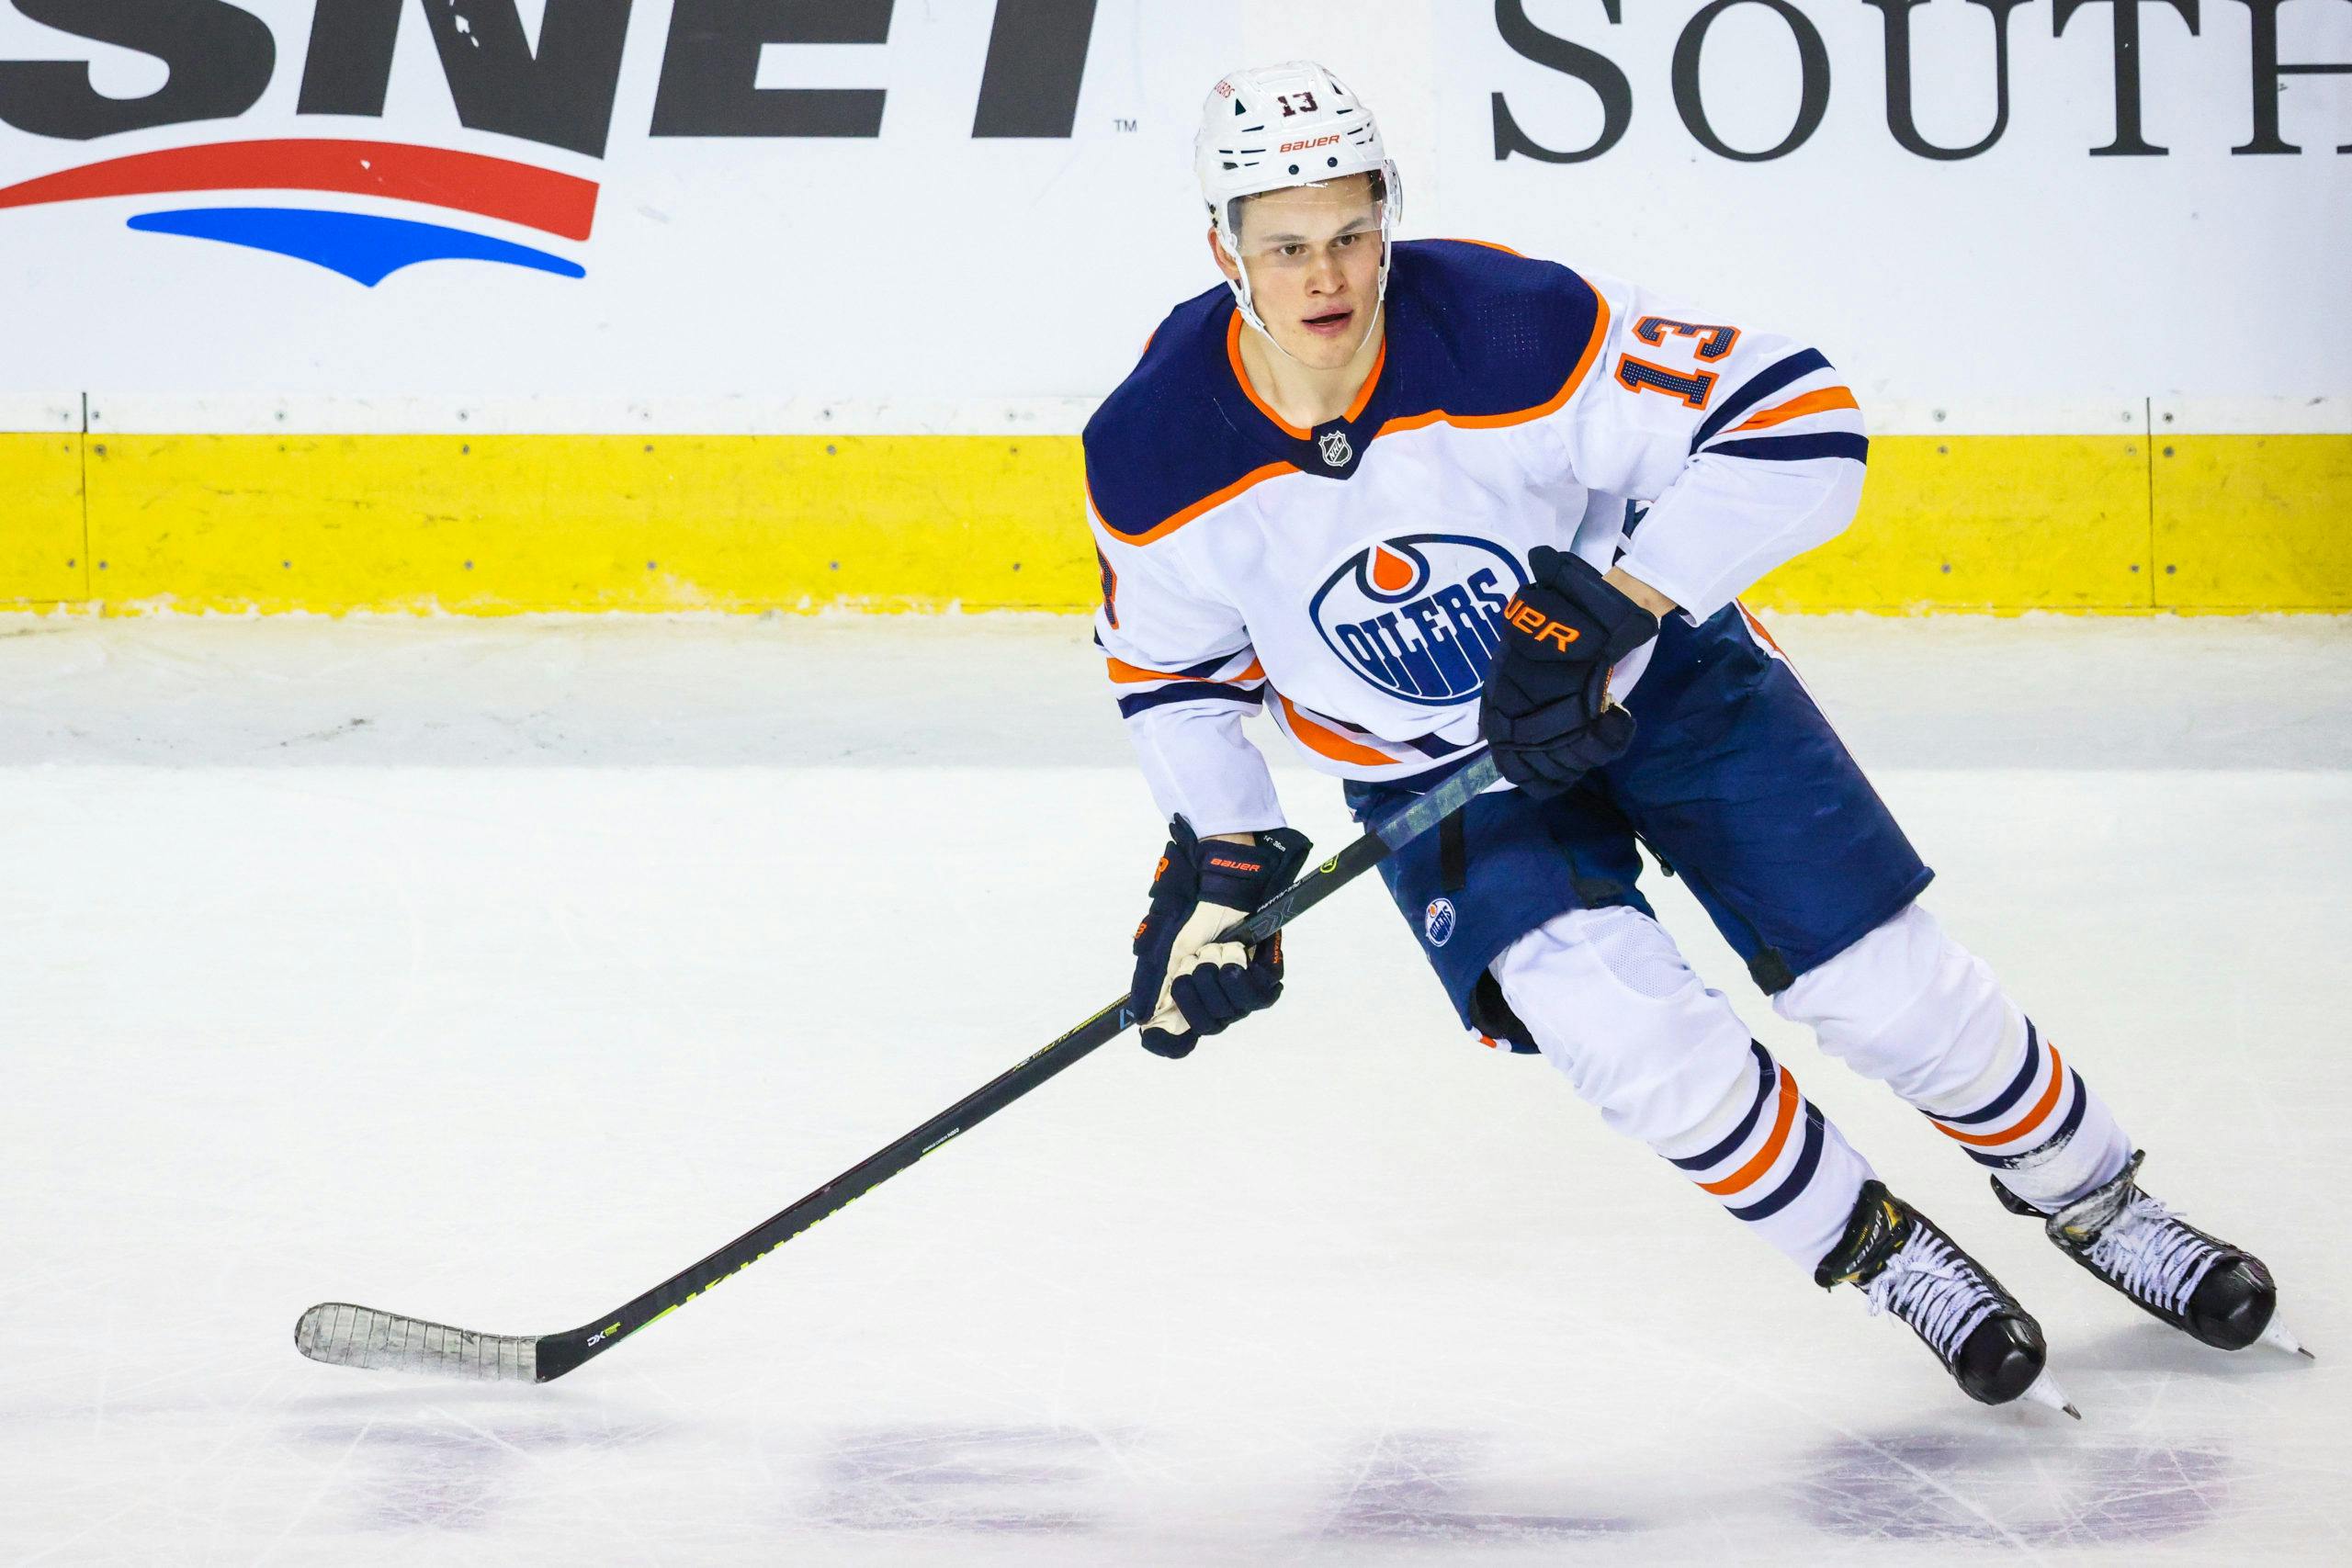 Jesse Puljujarvi all smiles in second stint with Oilers